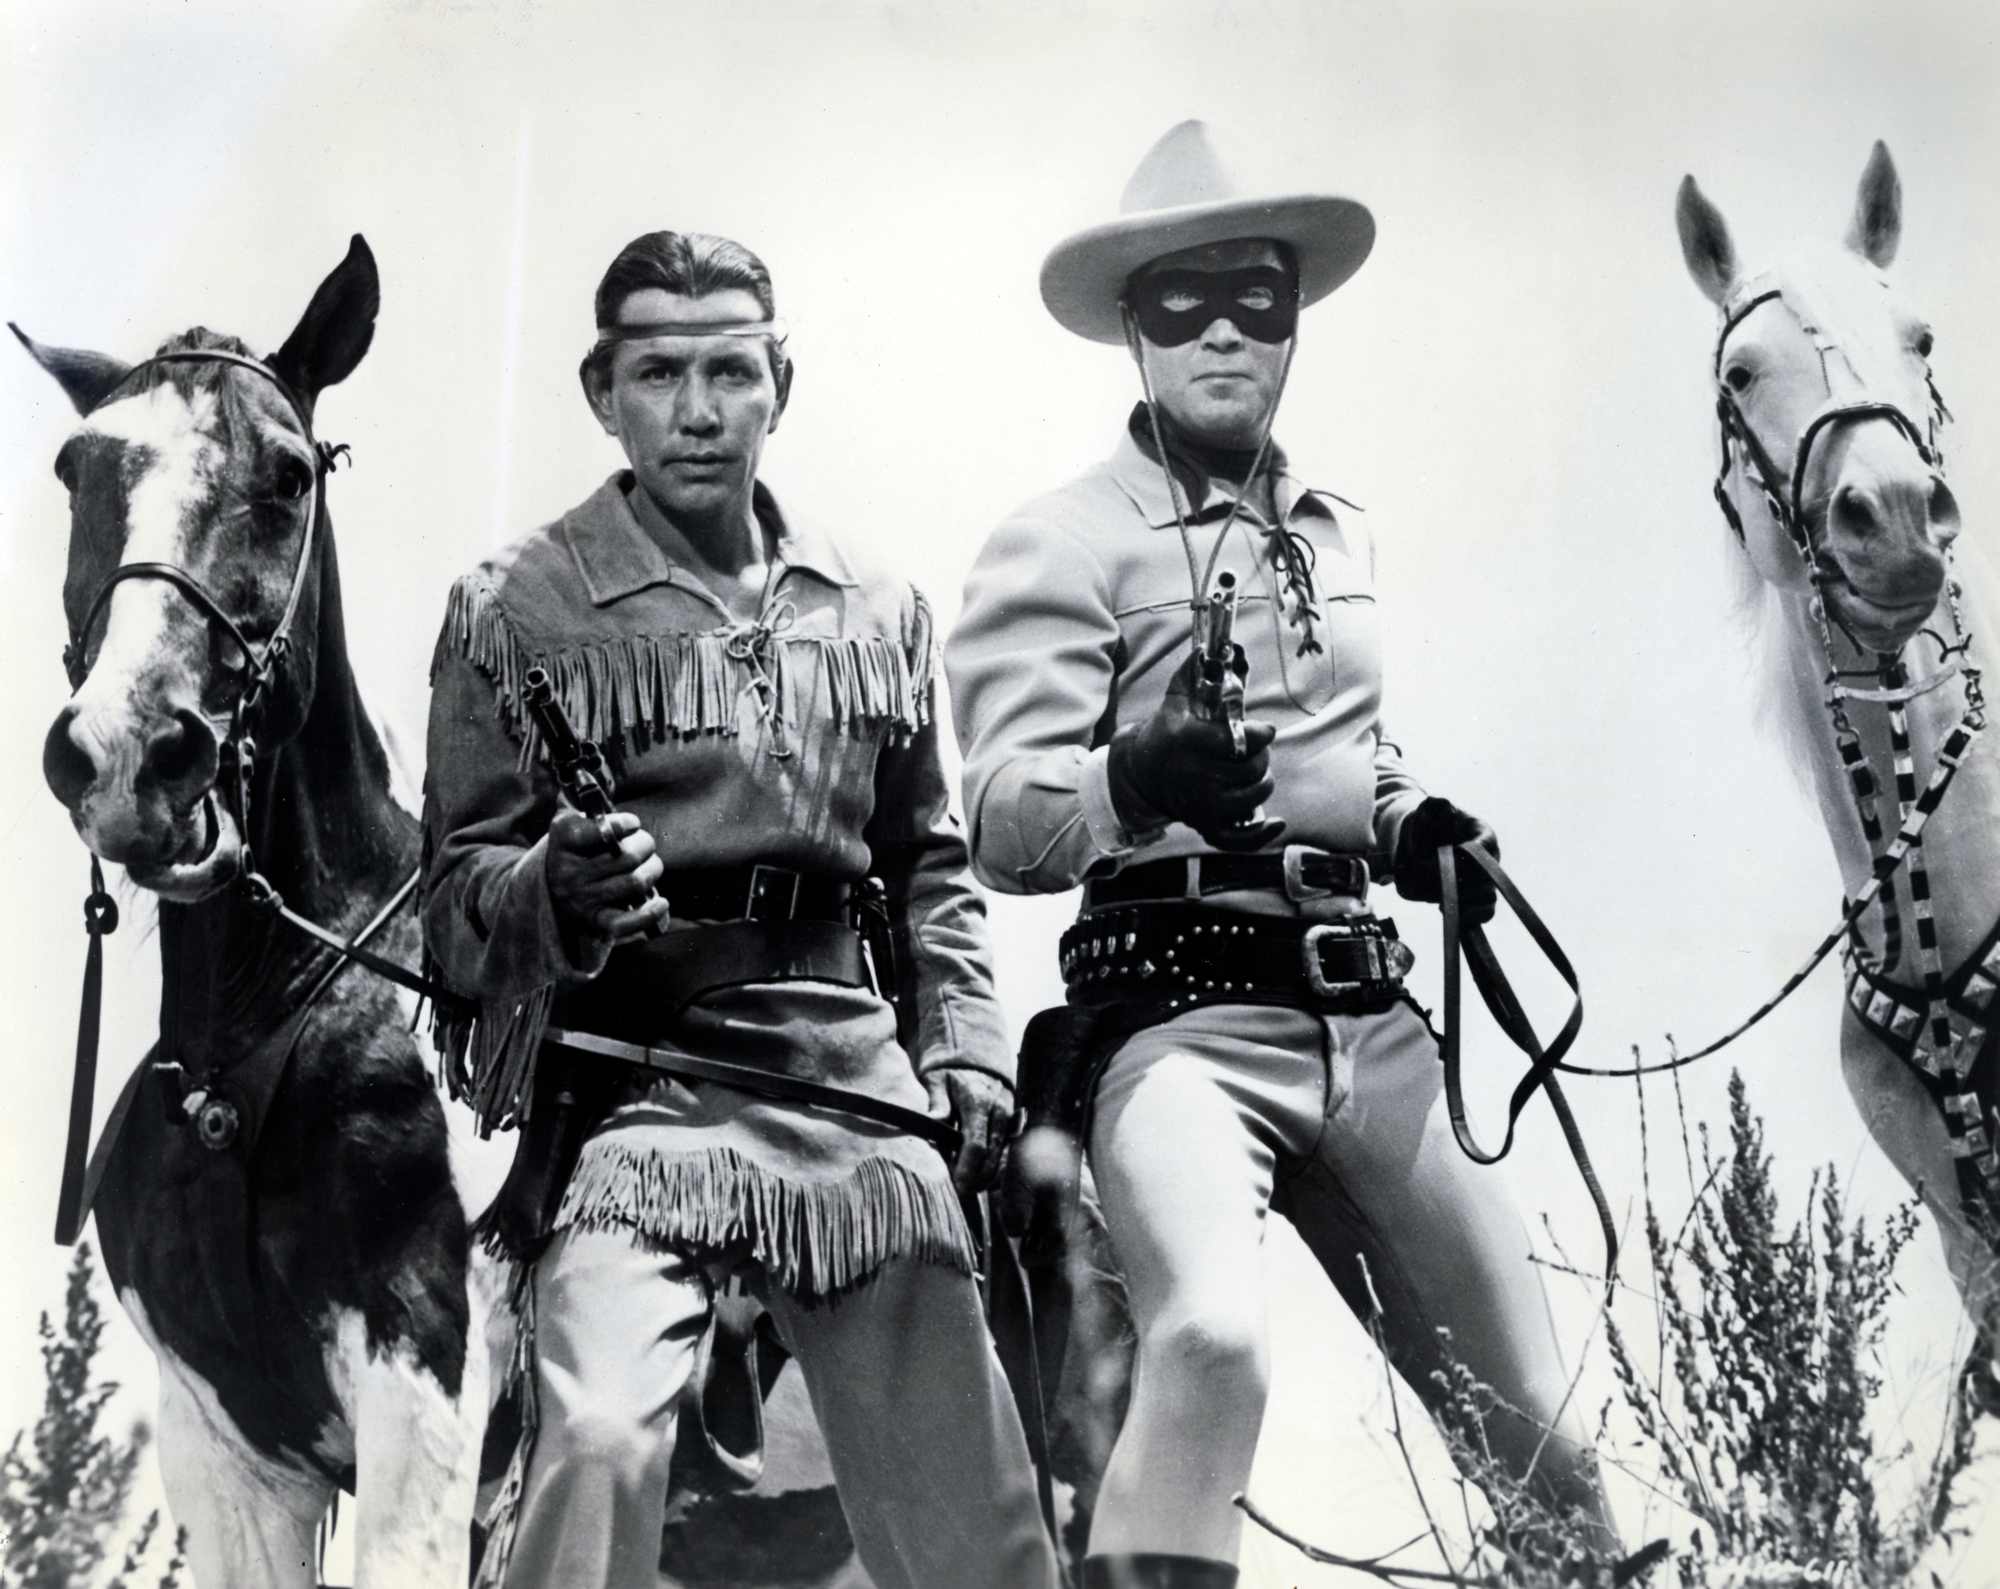 'The Lone Ranger' Jay Silverheels as Tonto and Clayton Moore as The Lone Ranger holding out their pistols, standing in front of their horses.